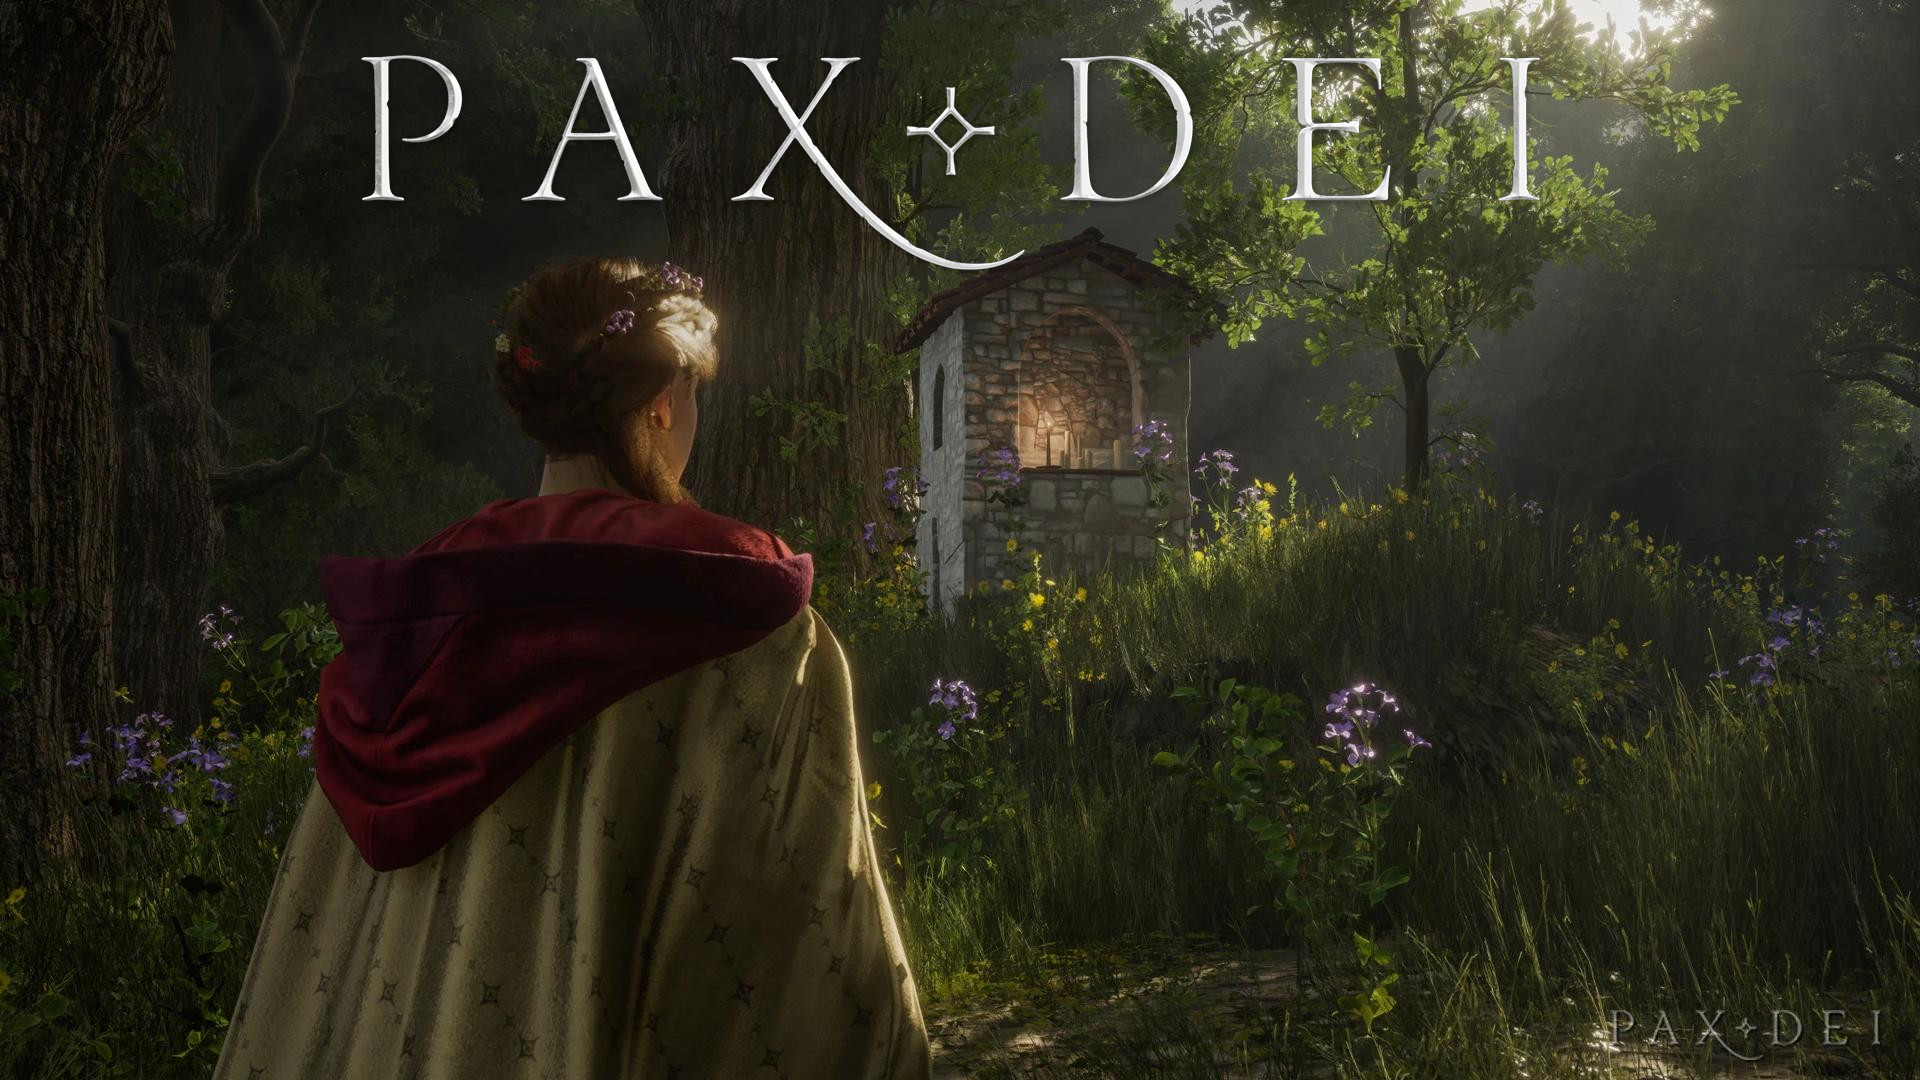 Pax Dei logo on top of a screenshot from the game. A woman in medieval clothing is looking out over the forest